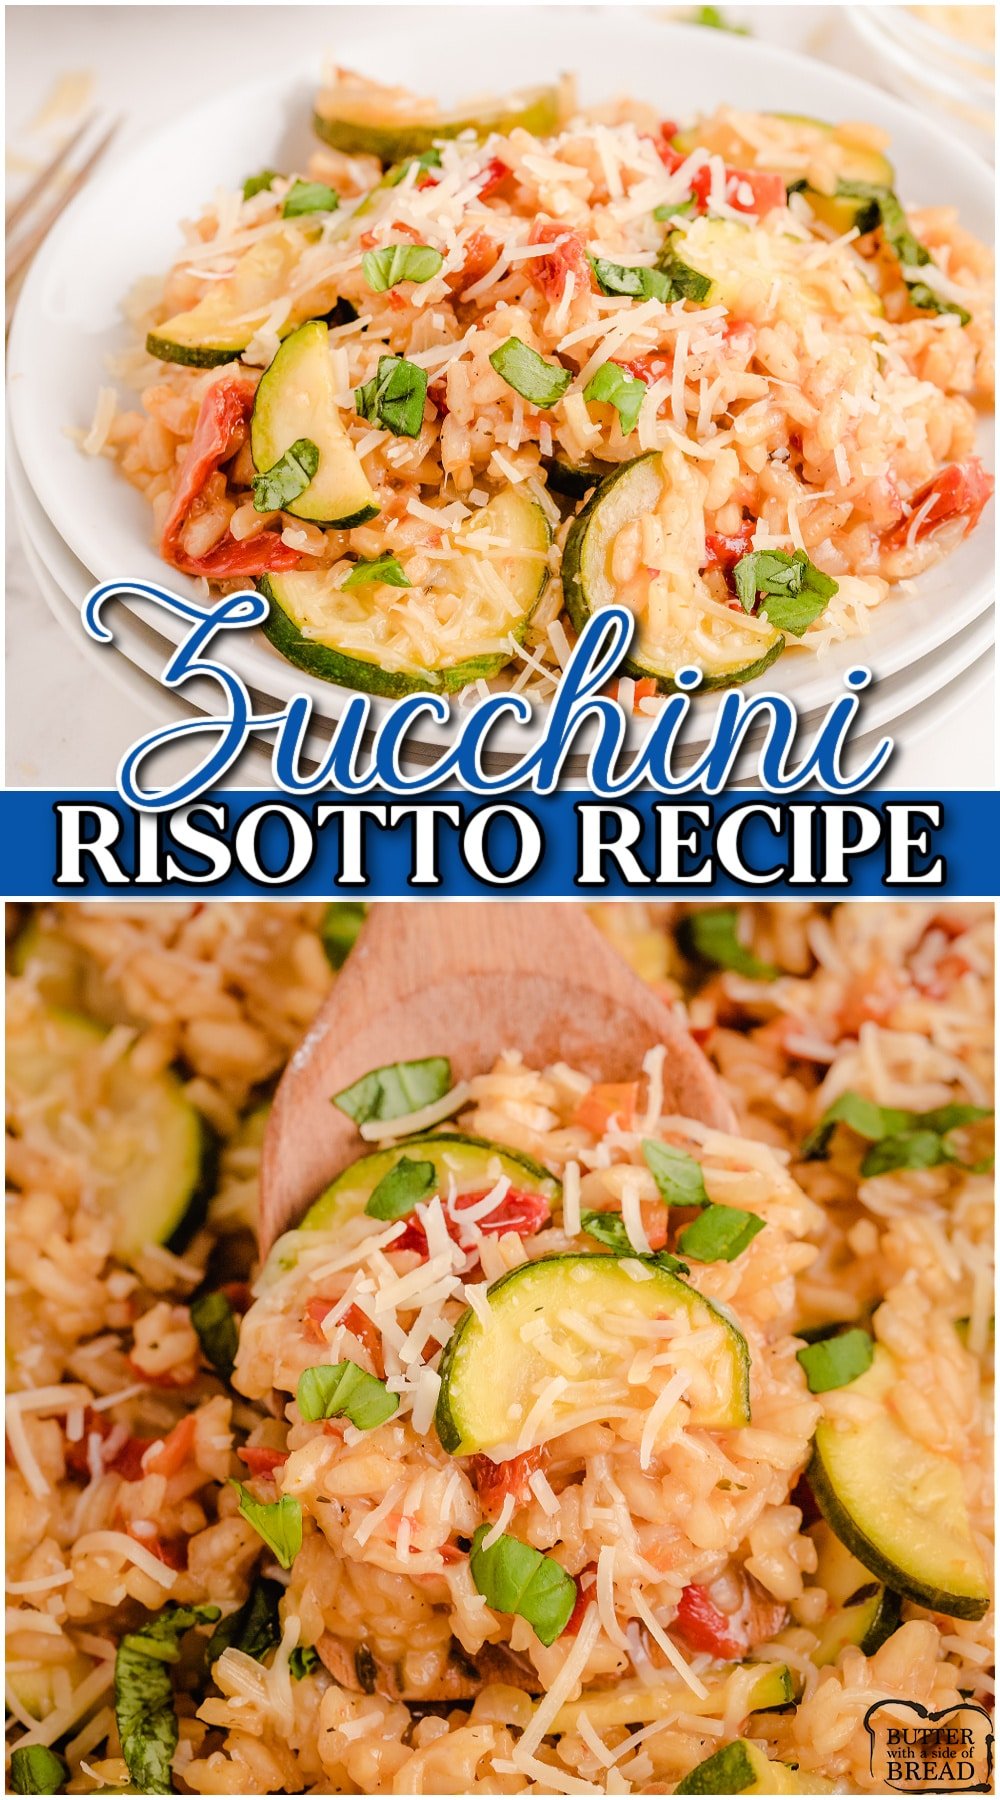 Zucchini risotto is simple, comforting dish made with rice, fresh vegetables, cheese & savory herbs. Perfect zucchini side dish or main dish that both hearty & healthy, with tons of flavor!